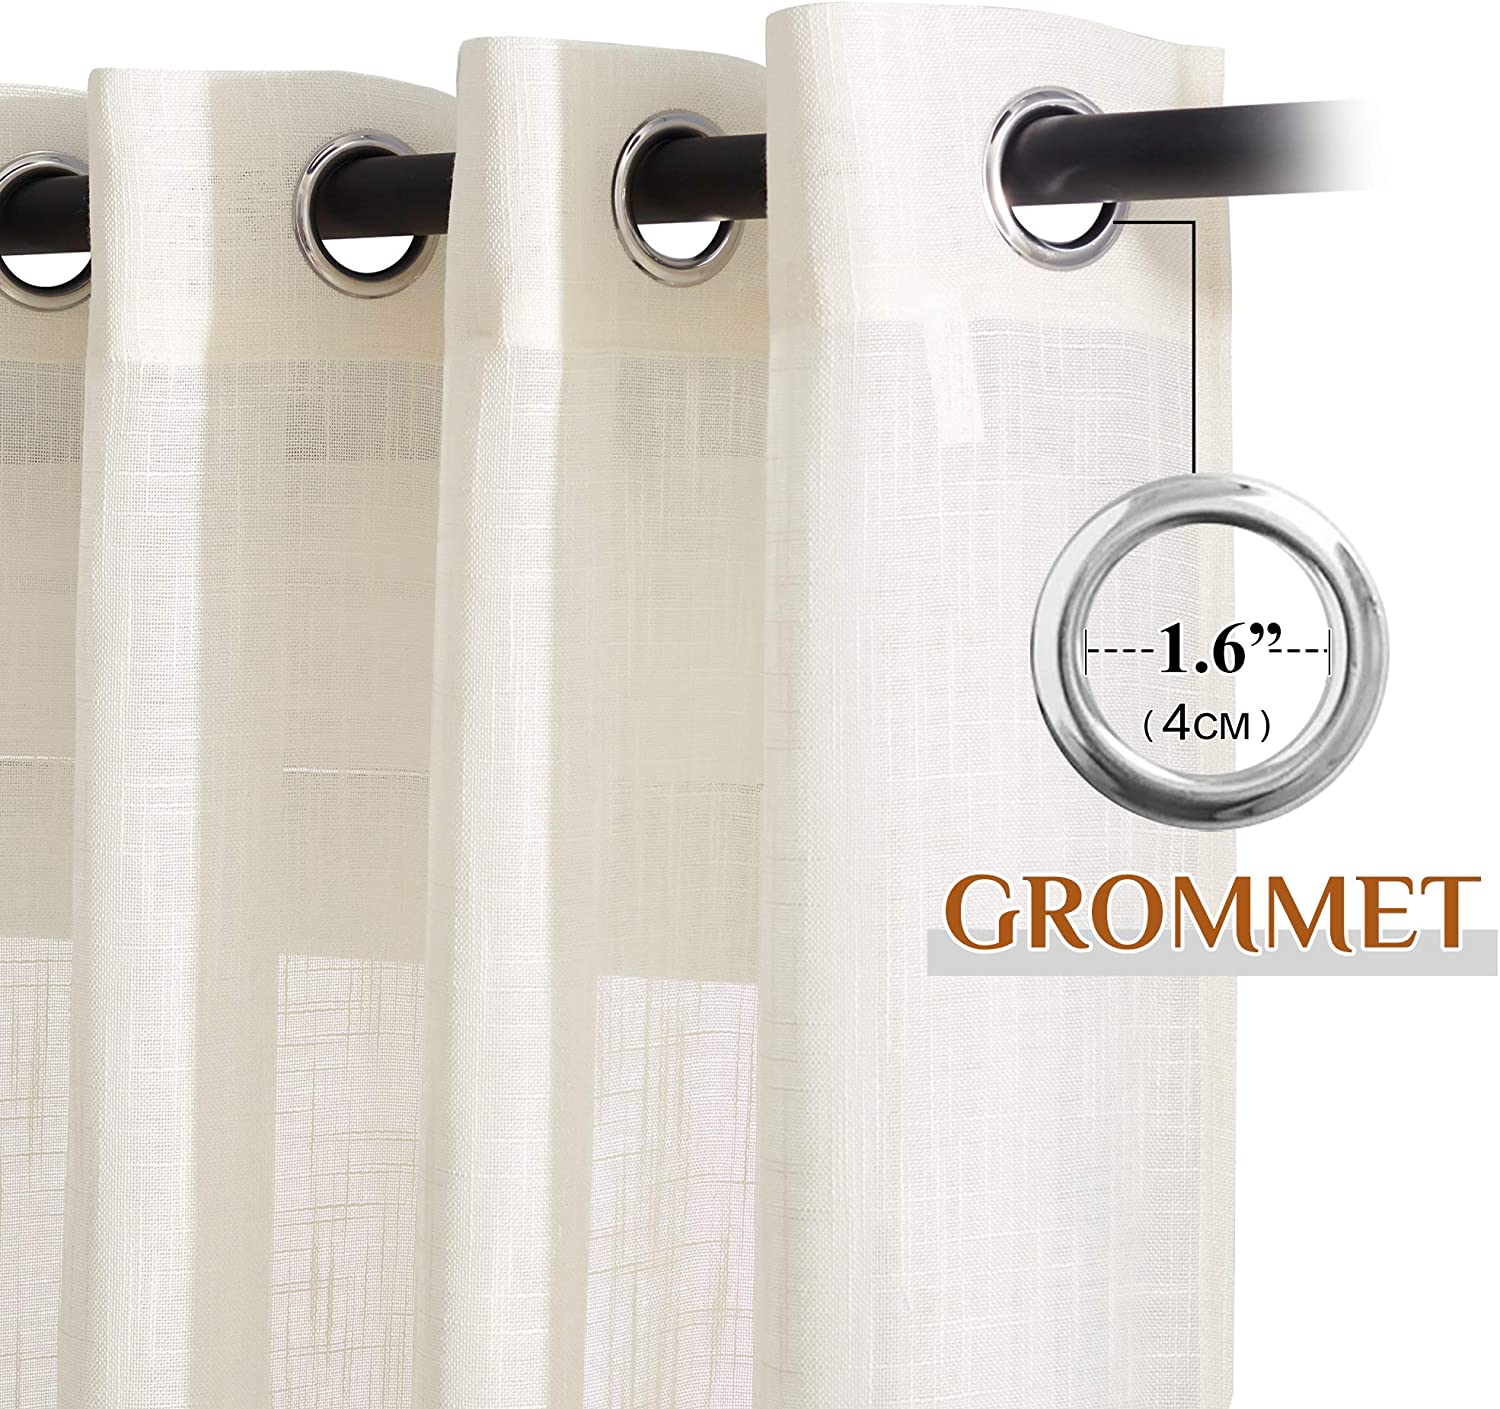 1 Pair 52 Inches Wide Grommet Top Privacy Bedroom Linen Semi Sheer Curtains KGORGE Store